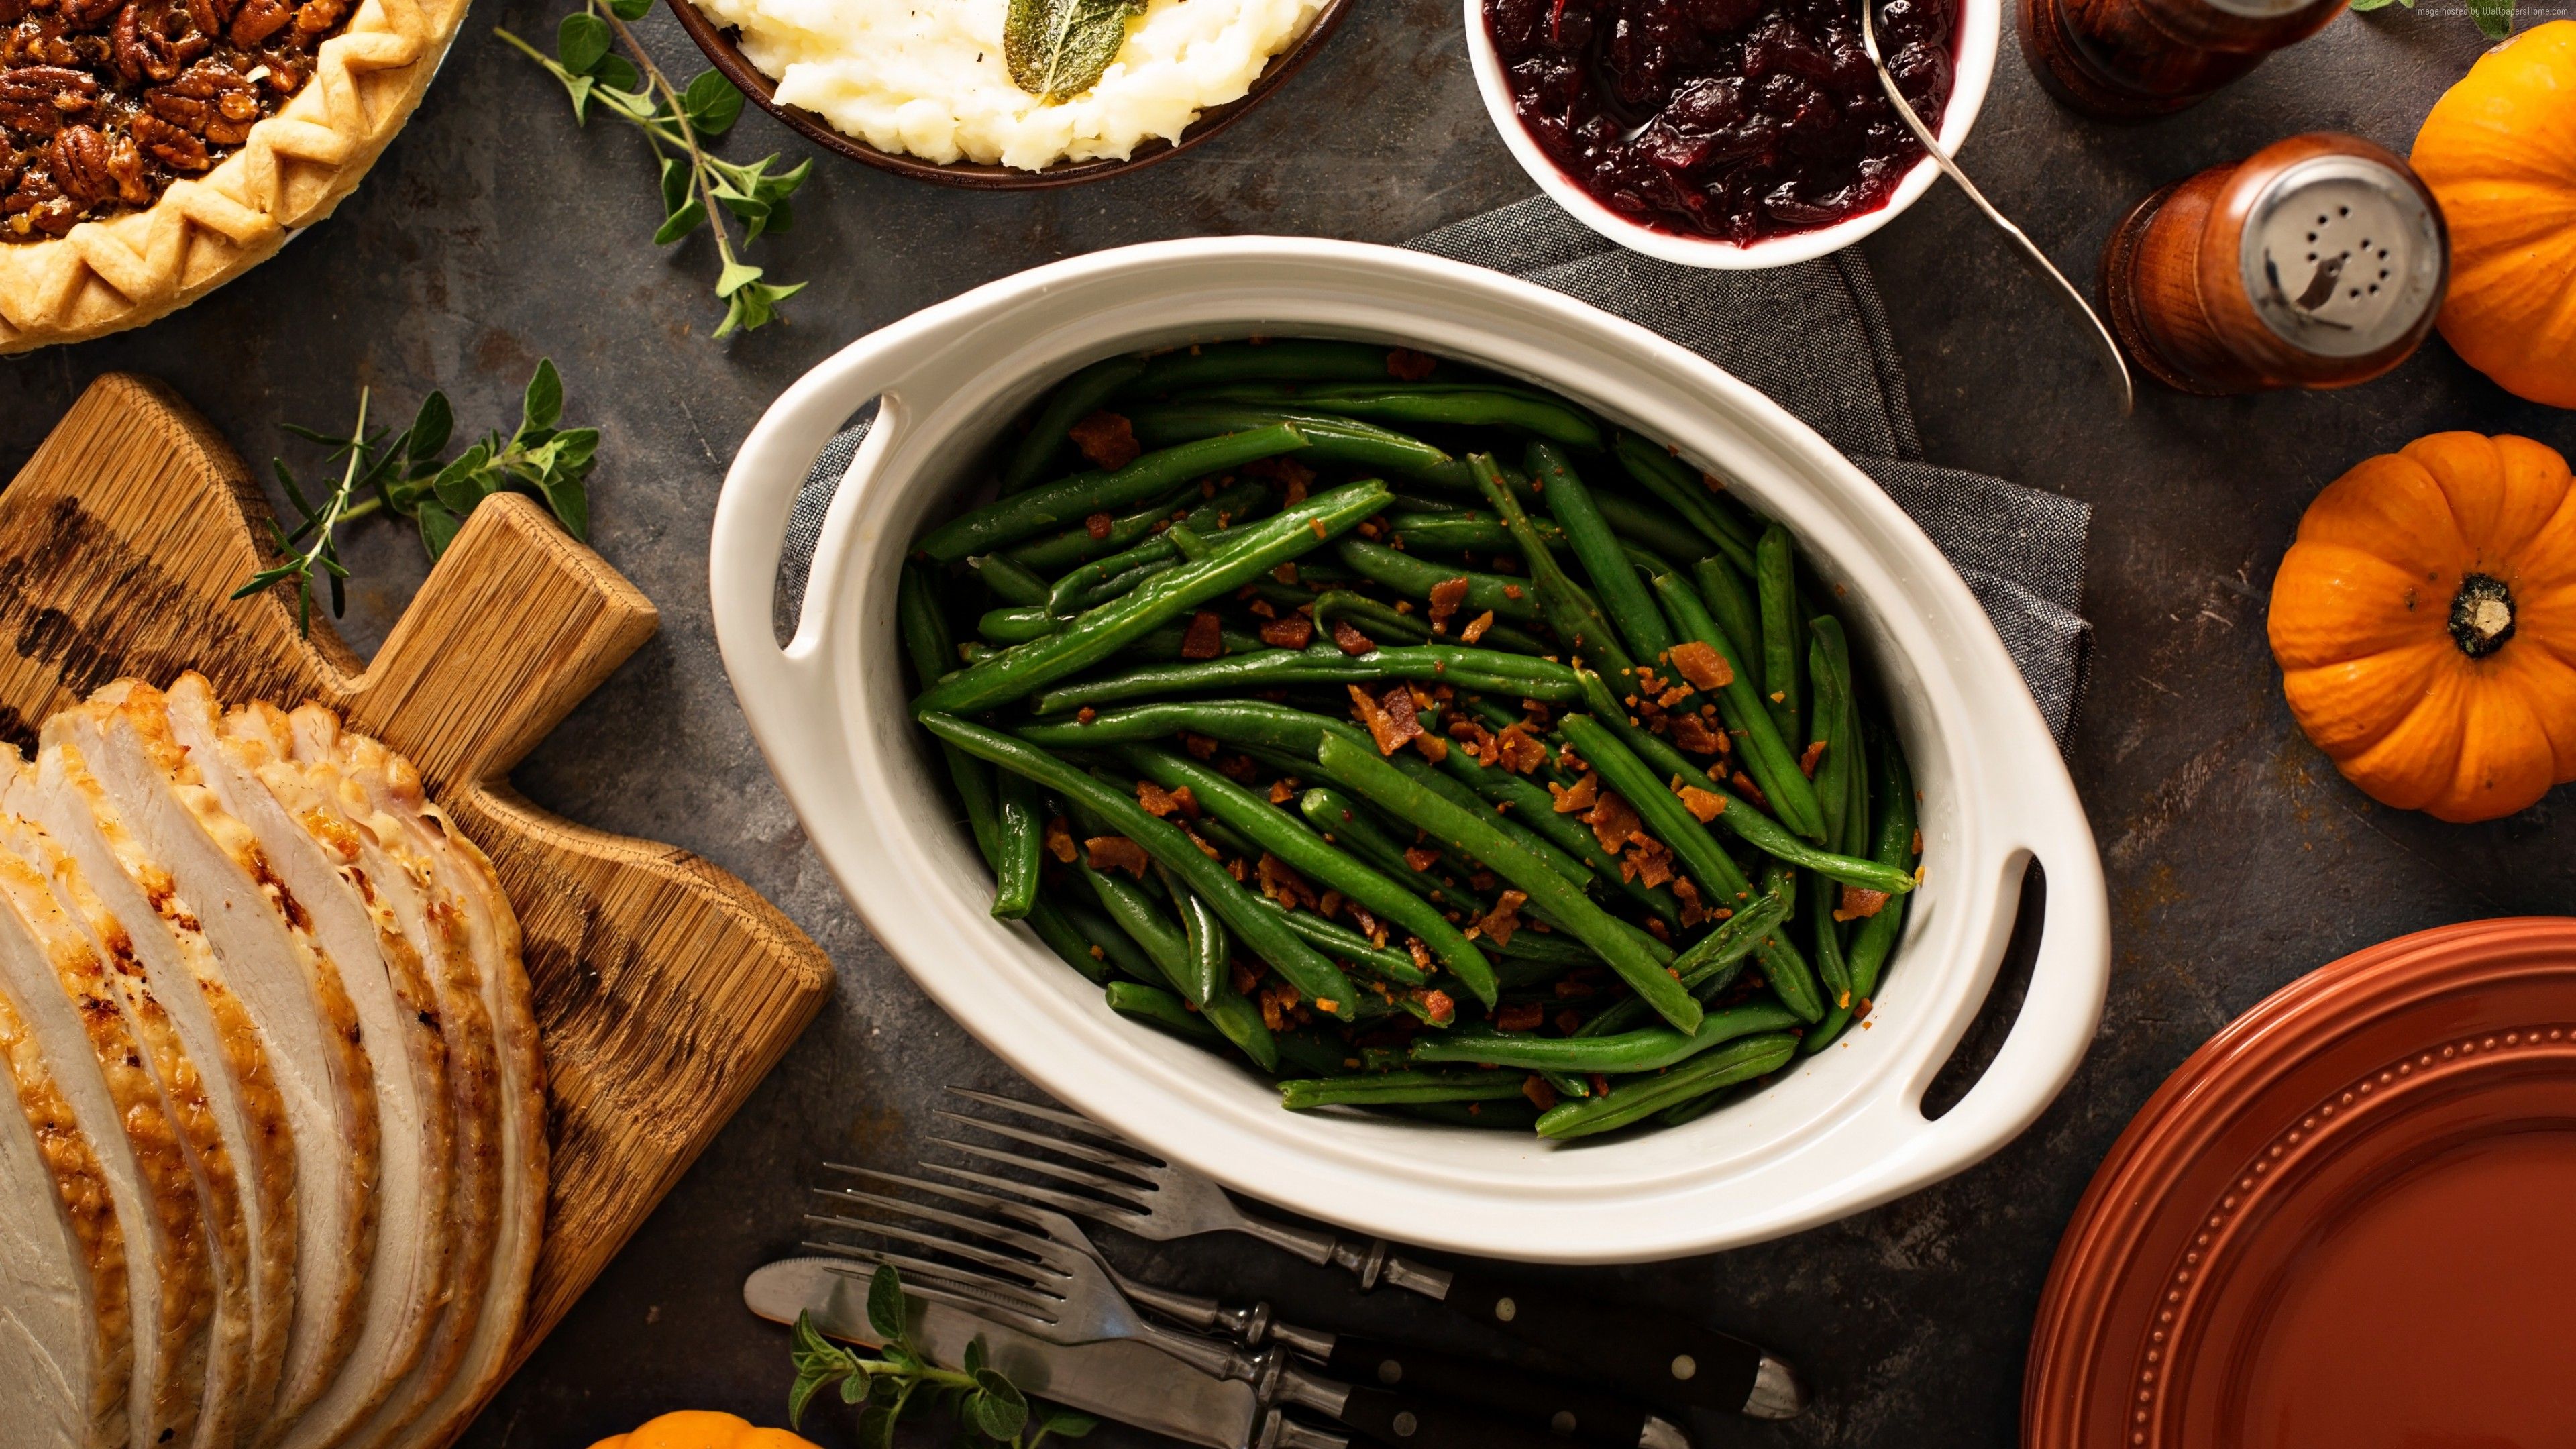 Green beans in a white roasting pan on the table wallpaper and image, picture, photo